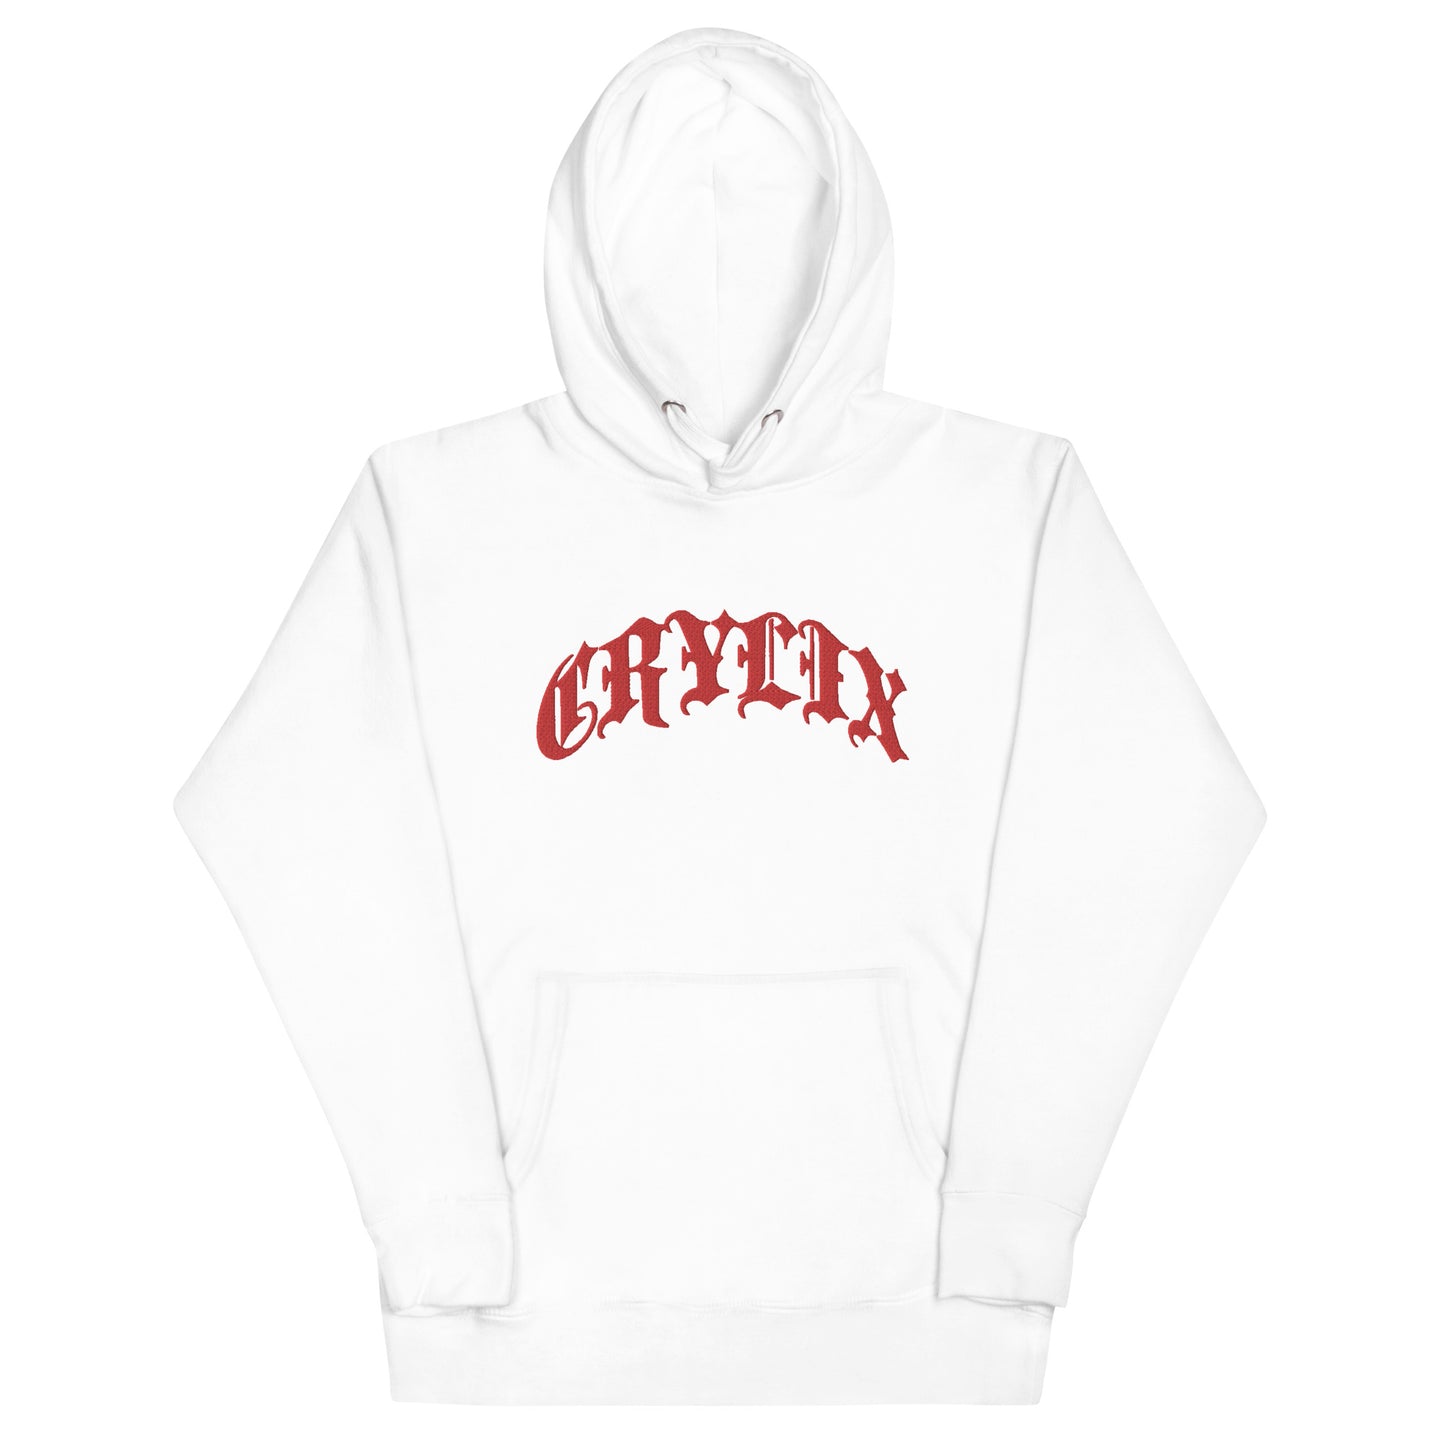 Unisex Crylix "Core" Embroidered Hoodie